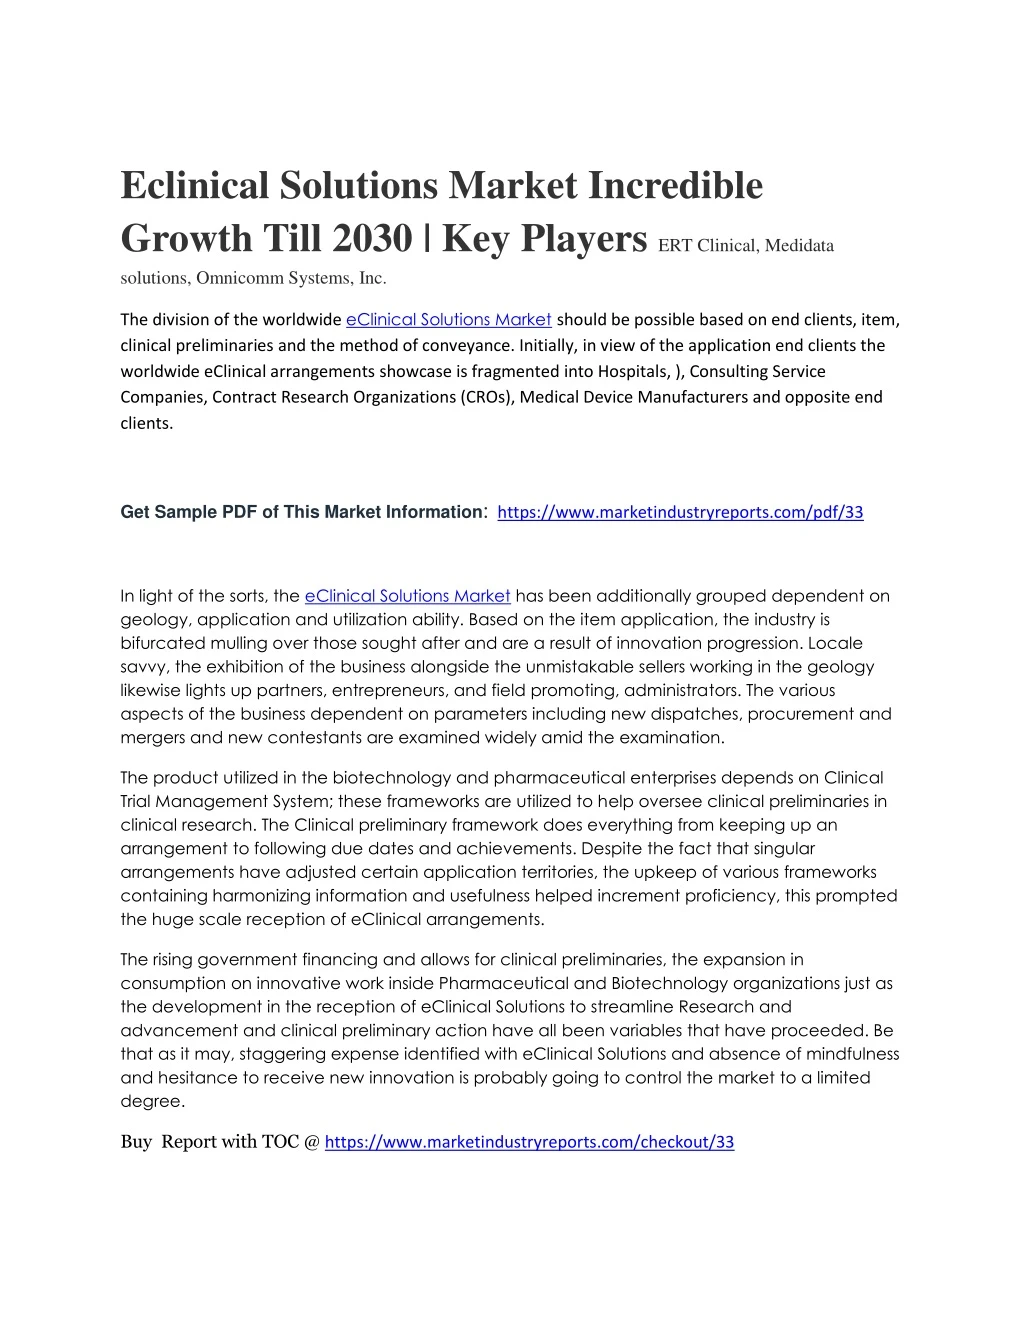 eclinical solutions market incredible growth till